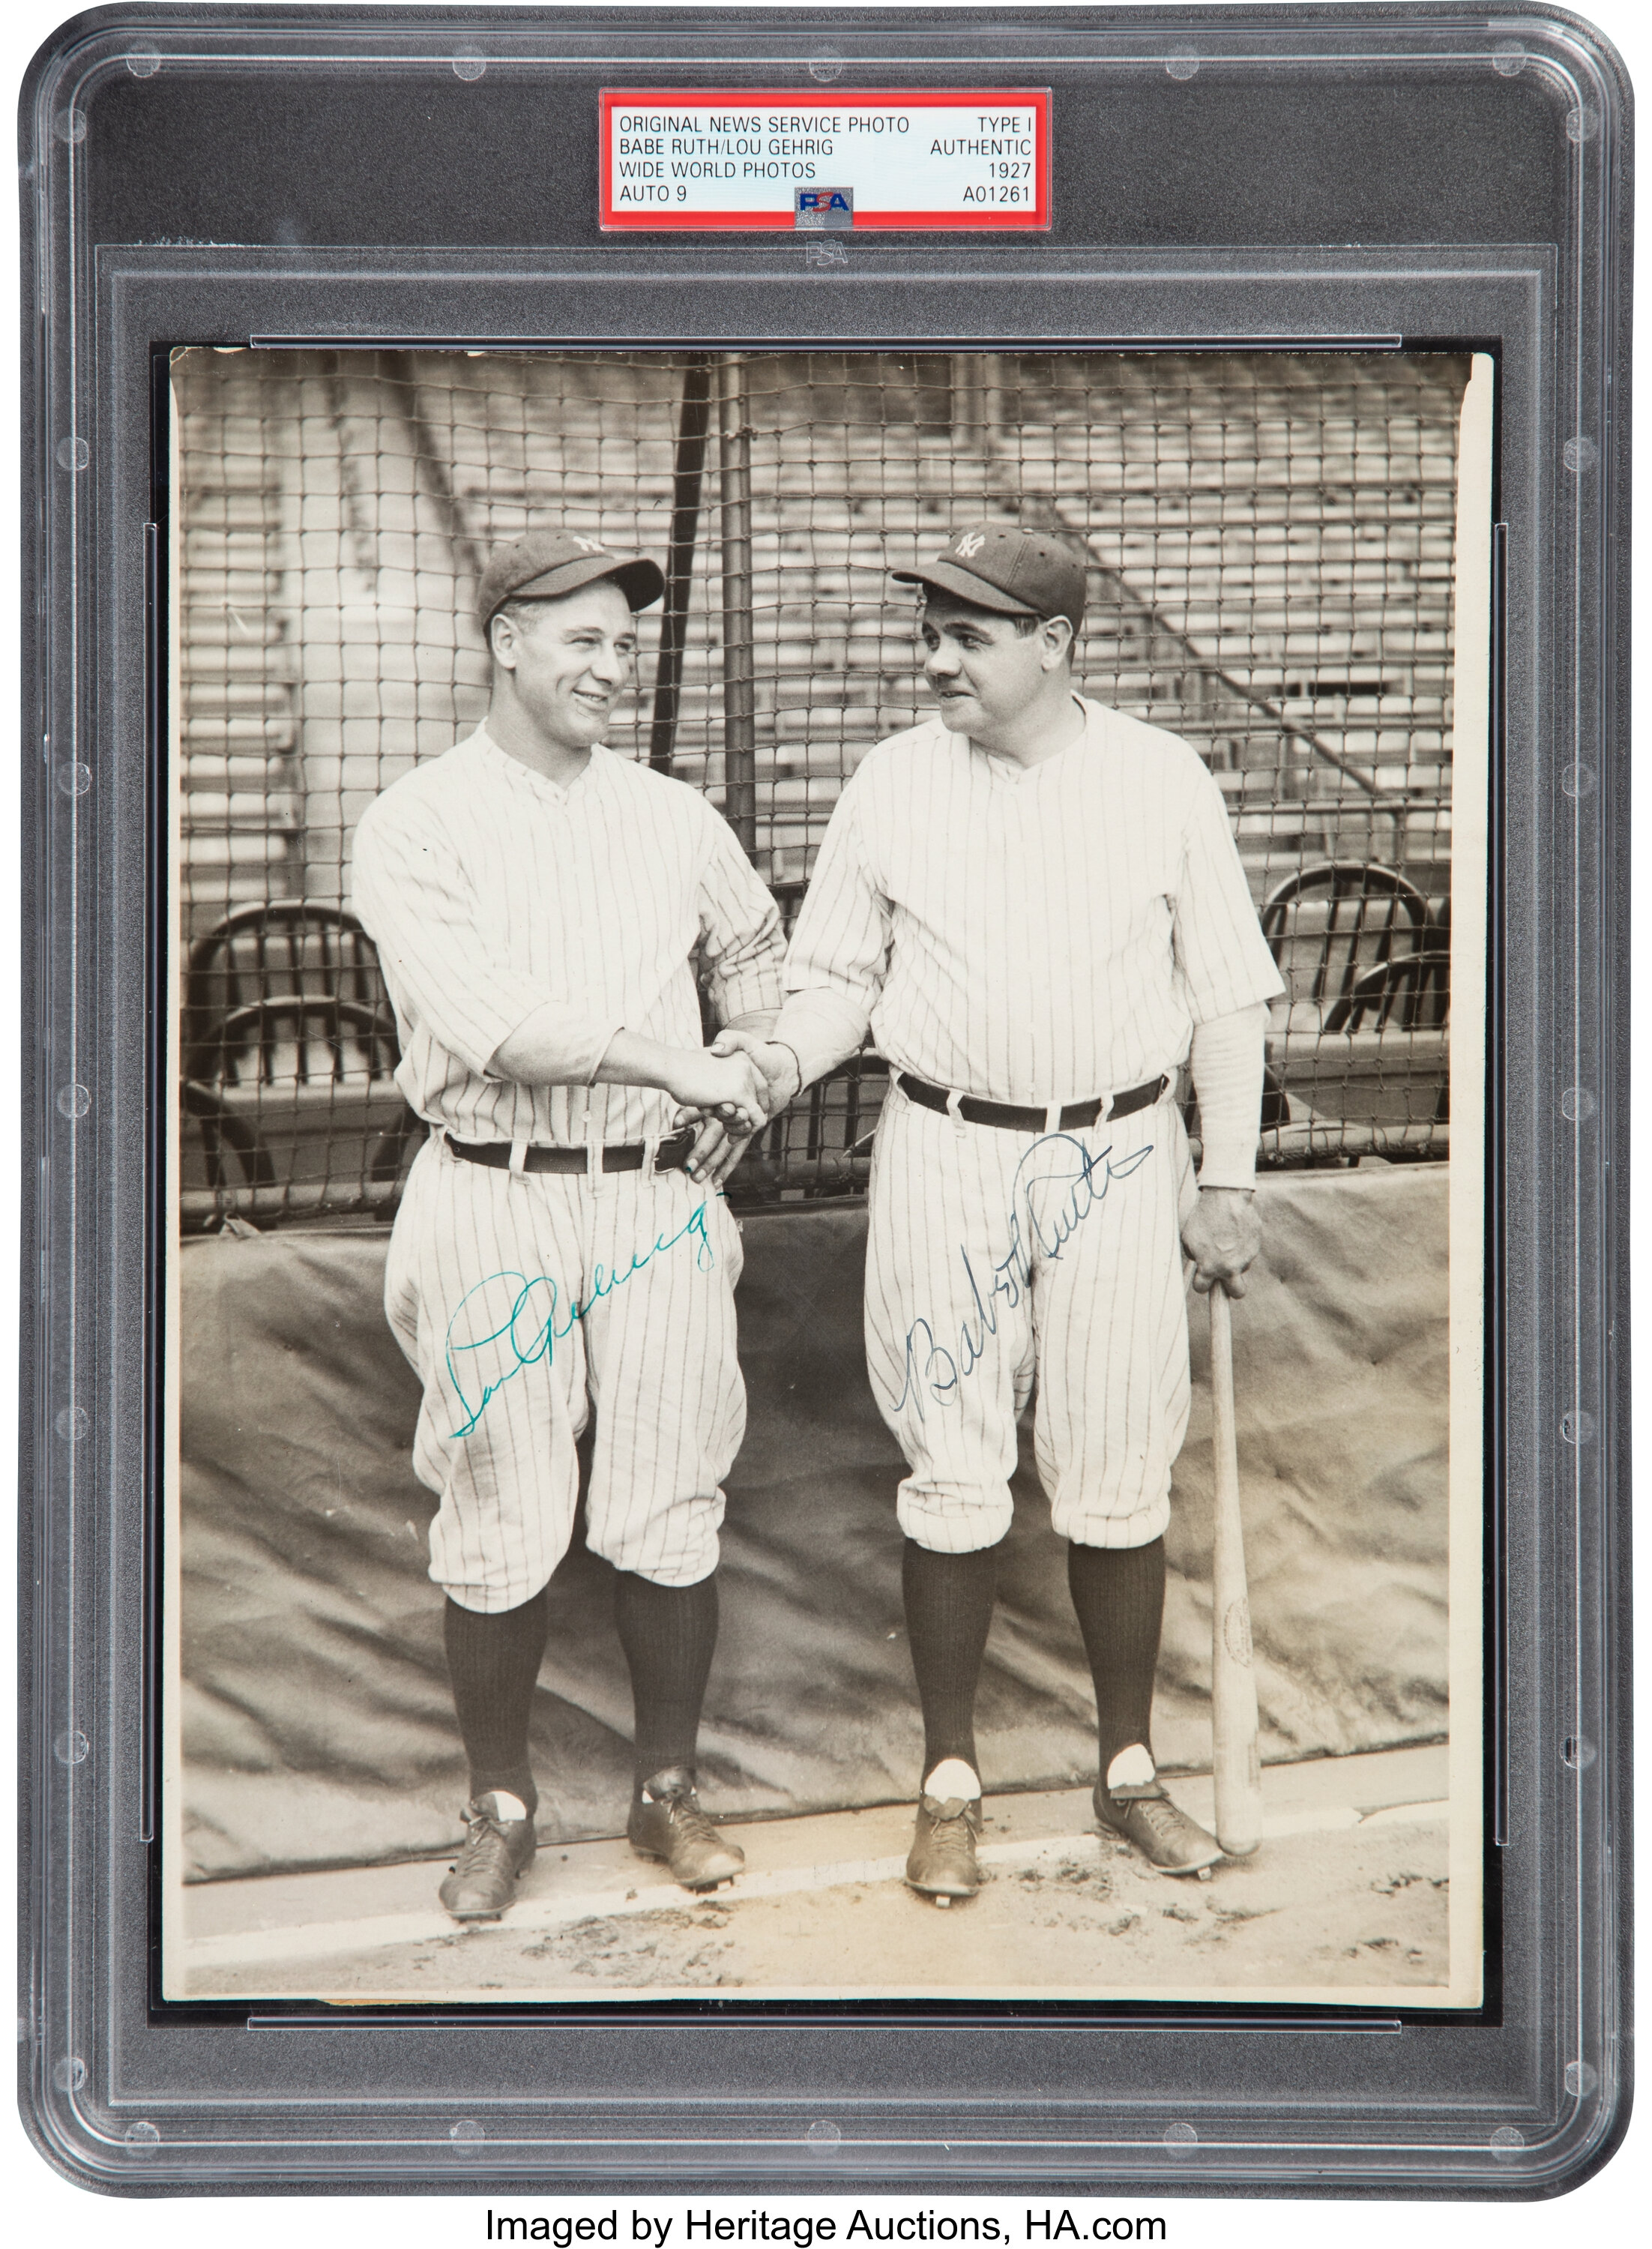 BABE RUTH LOU GEHRIG Autographed Cut Signature REPRINT Framed 8x10 Photo  YANKEES